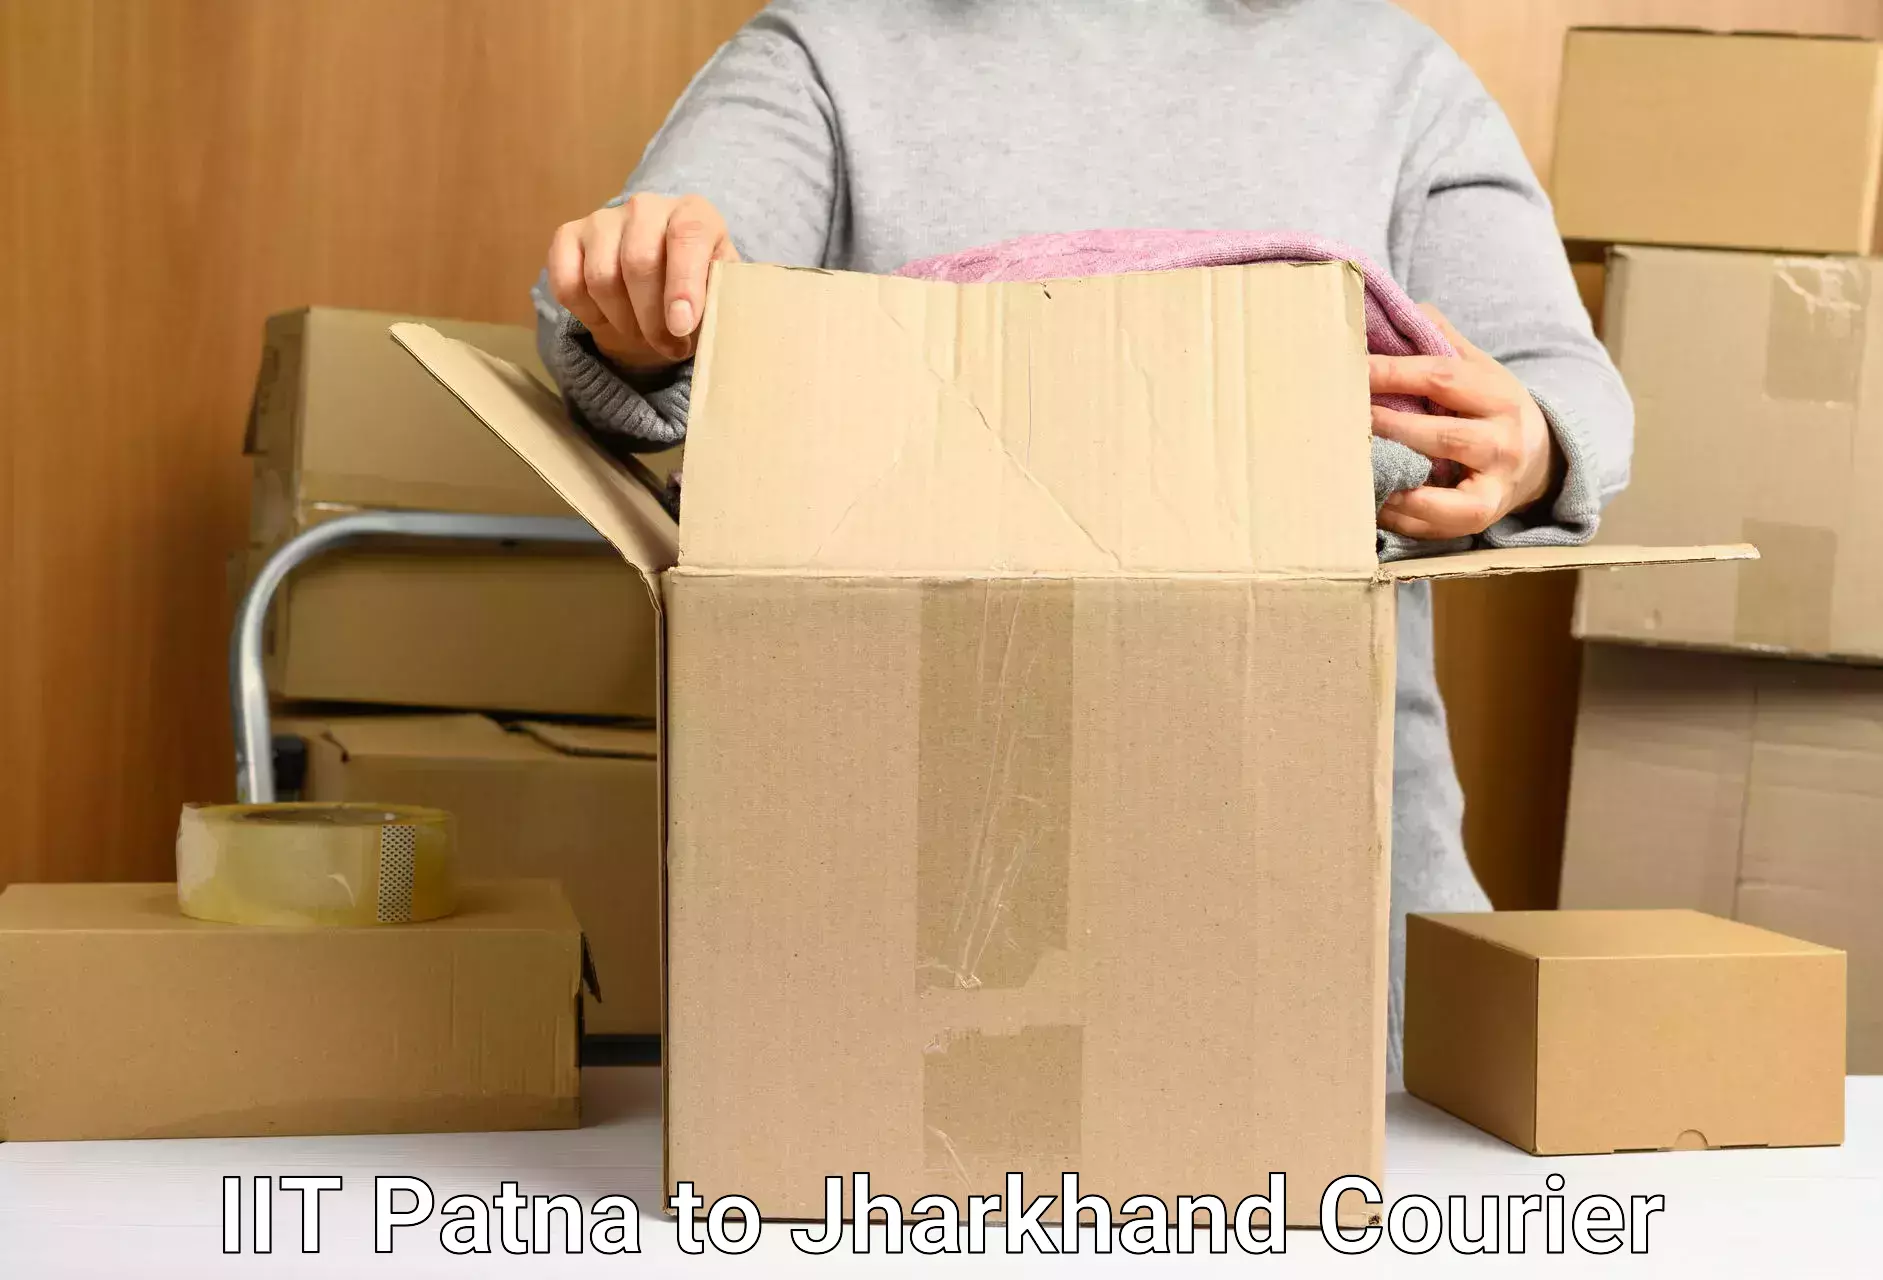 Online courier booking IIT Patna to Jharkhand